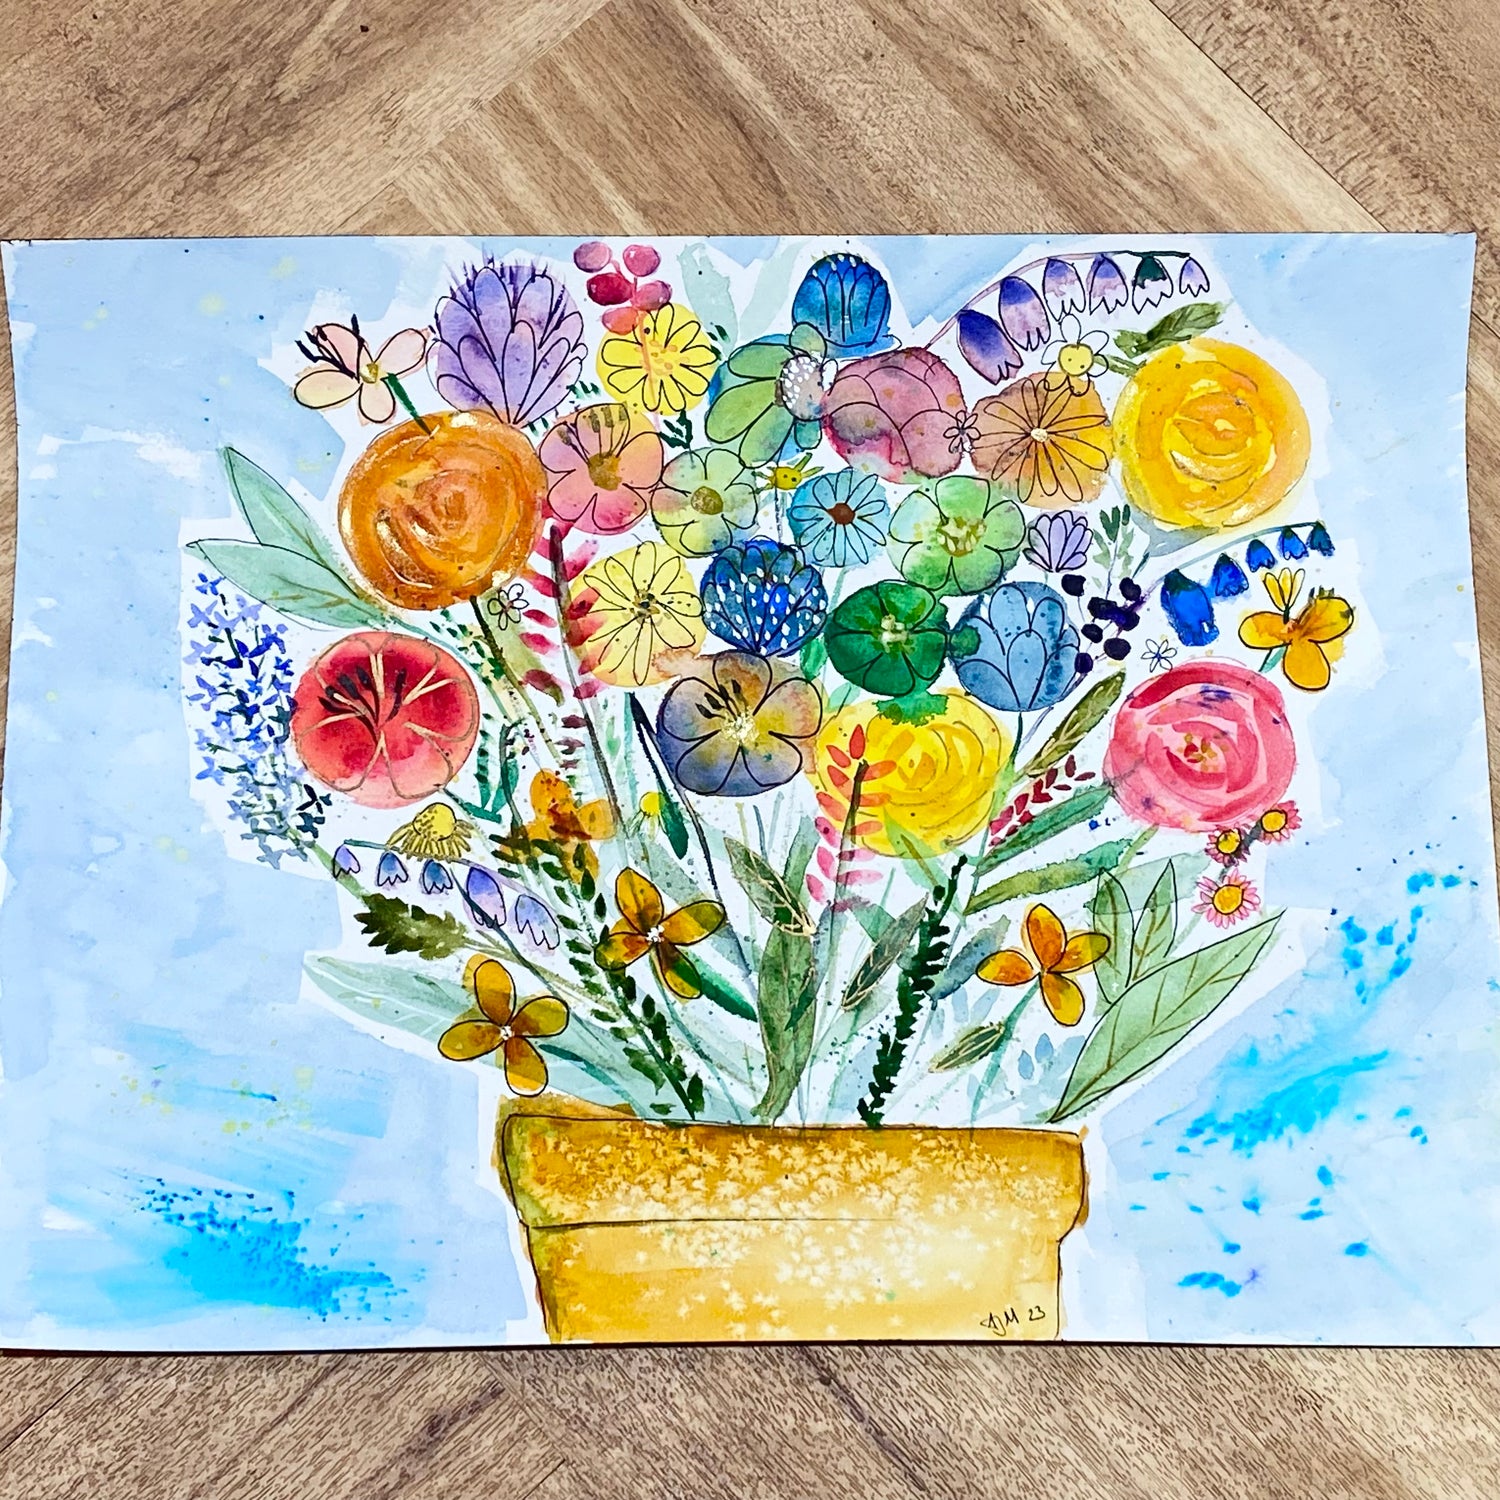 A Painting produced by a workshop attendee